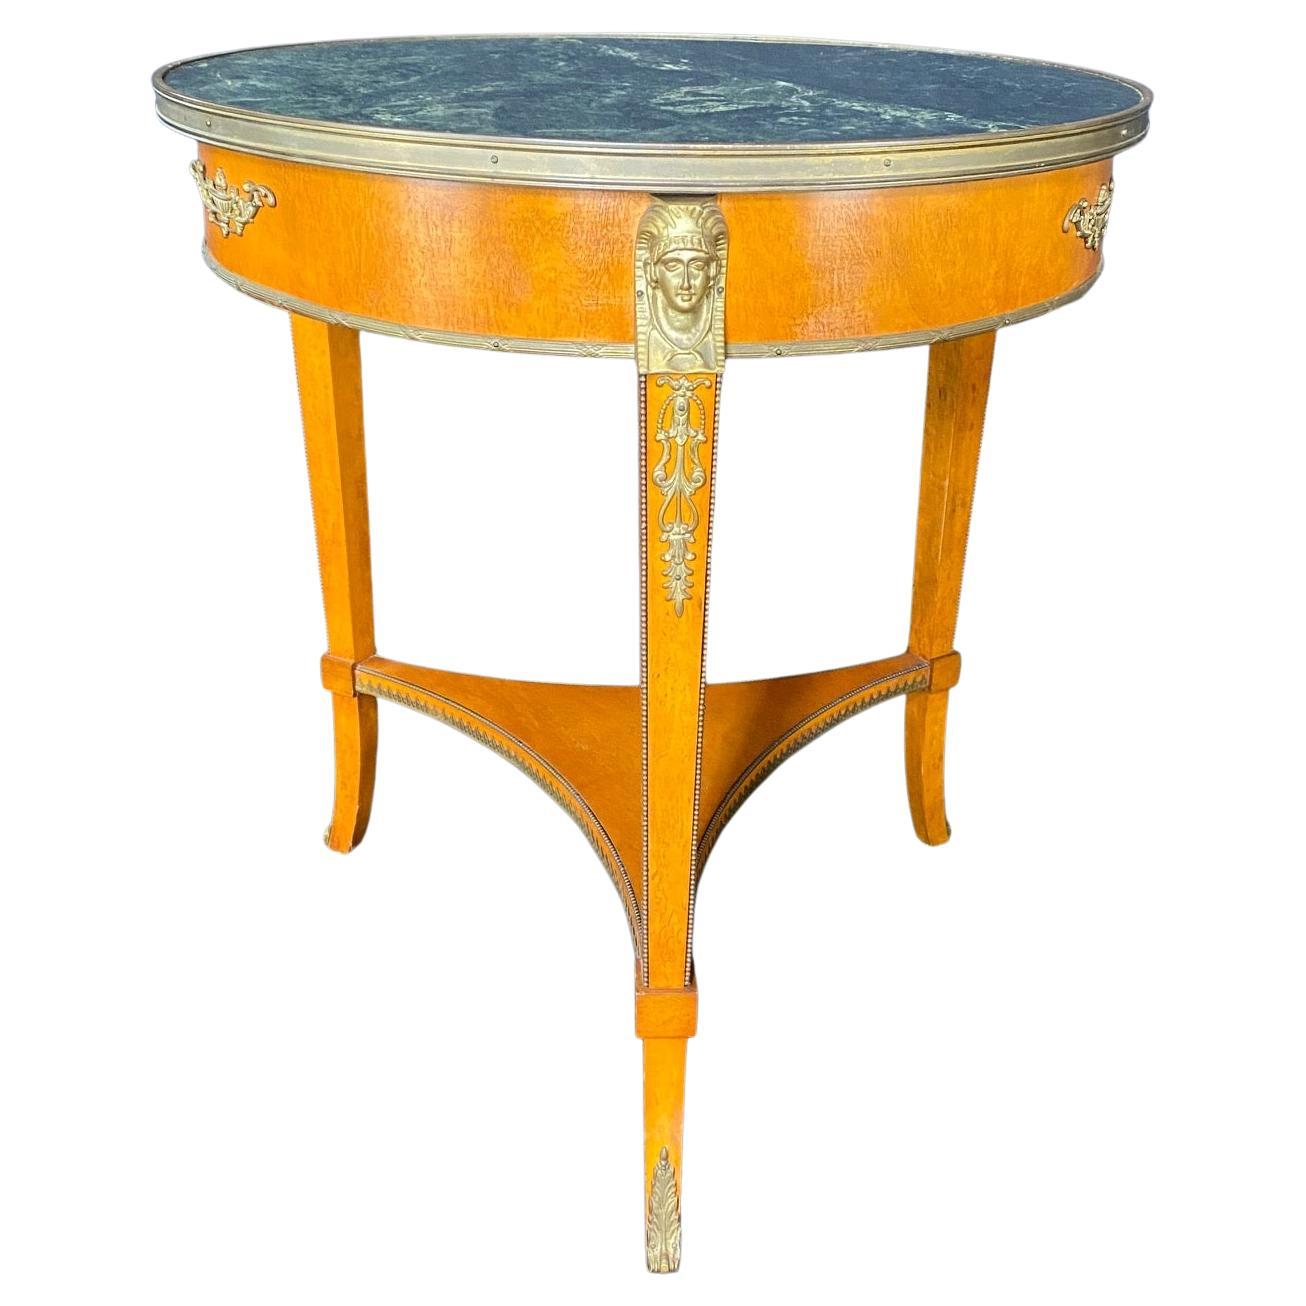 Elegant French Neoclassical Style Green Marble Top Bouilette or Side Table  For Sale